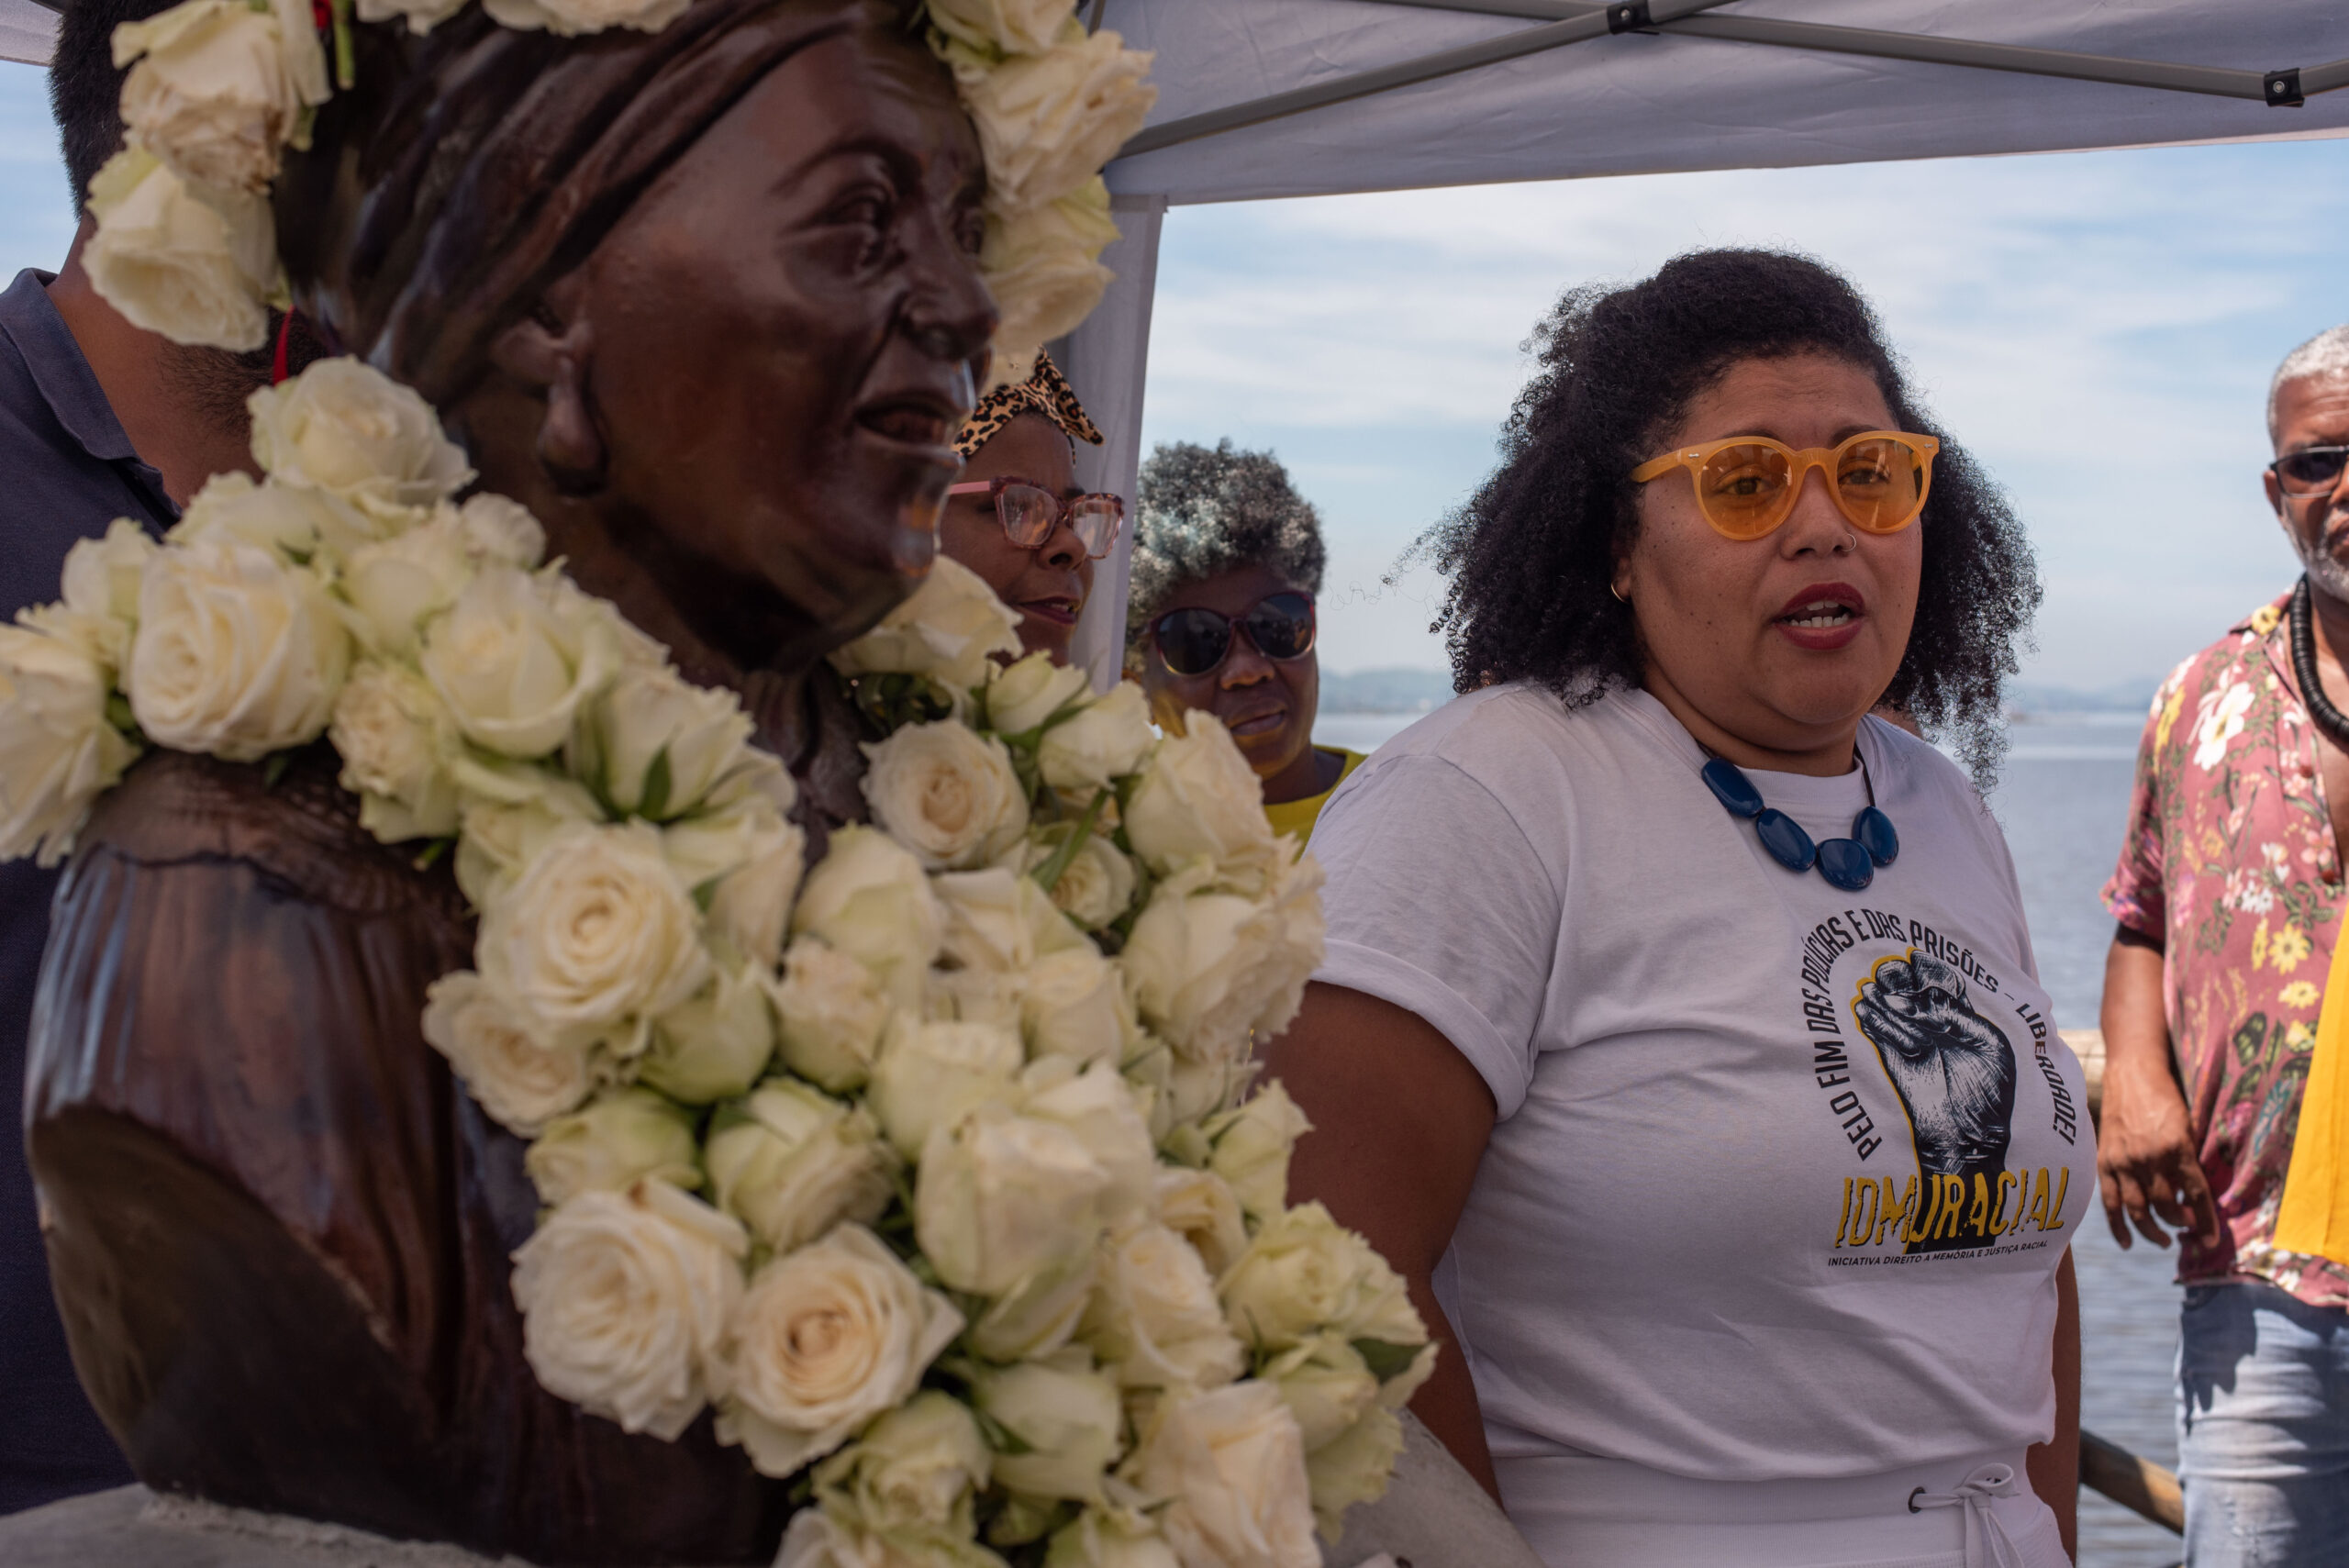 Giselle Florentino from the Right to Memory and Racial Justice Initiative (IDMRJ) speaking to those present at the ceremony “Maria Conga’s Coronation.” Photo: Bárbara Dias